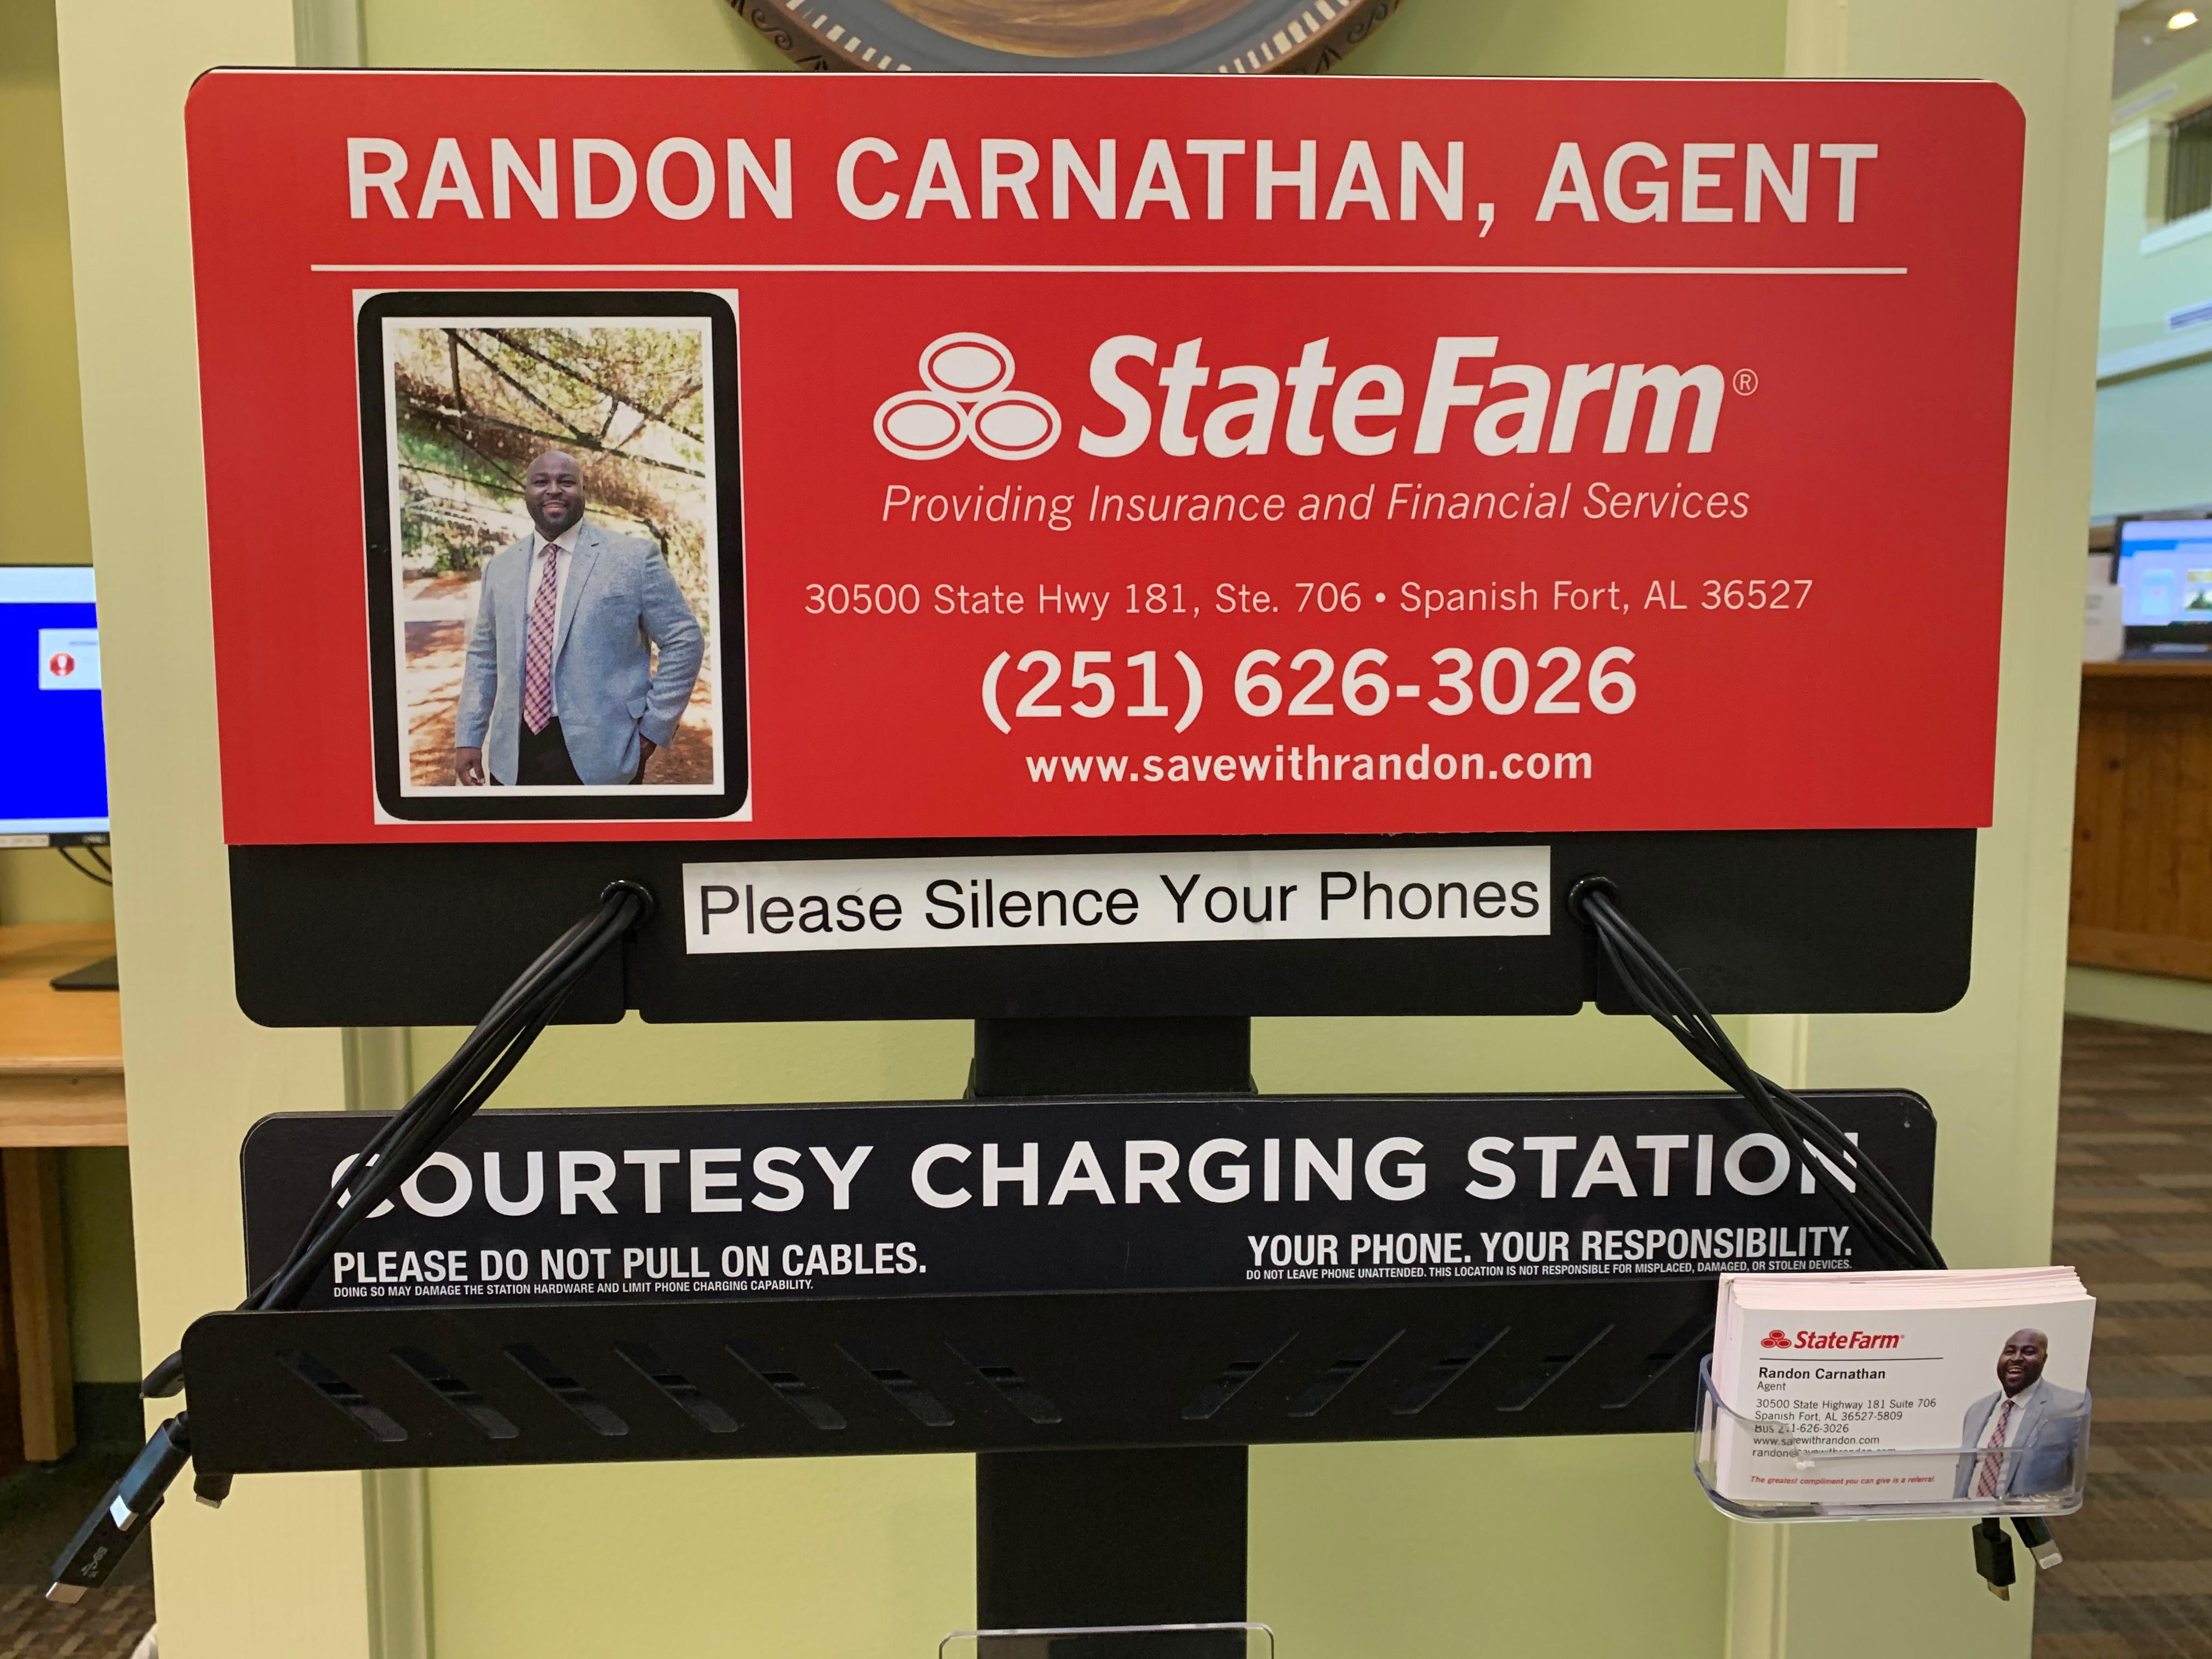 Need a charge? For your convenience, please find my charging station at the Fairhope Public Library, located at 501 Fairhope Ave, Fairhope, AL 36532